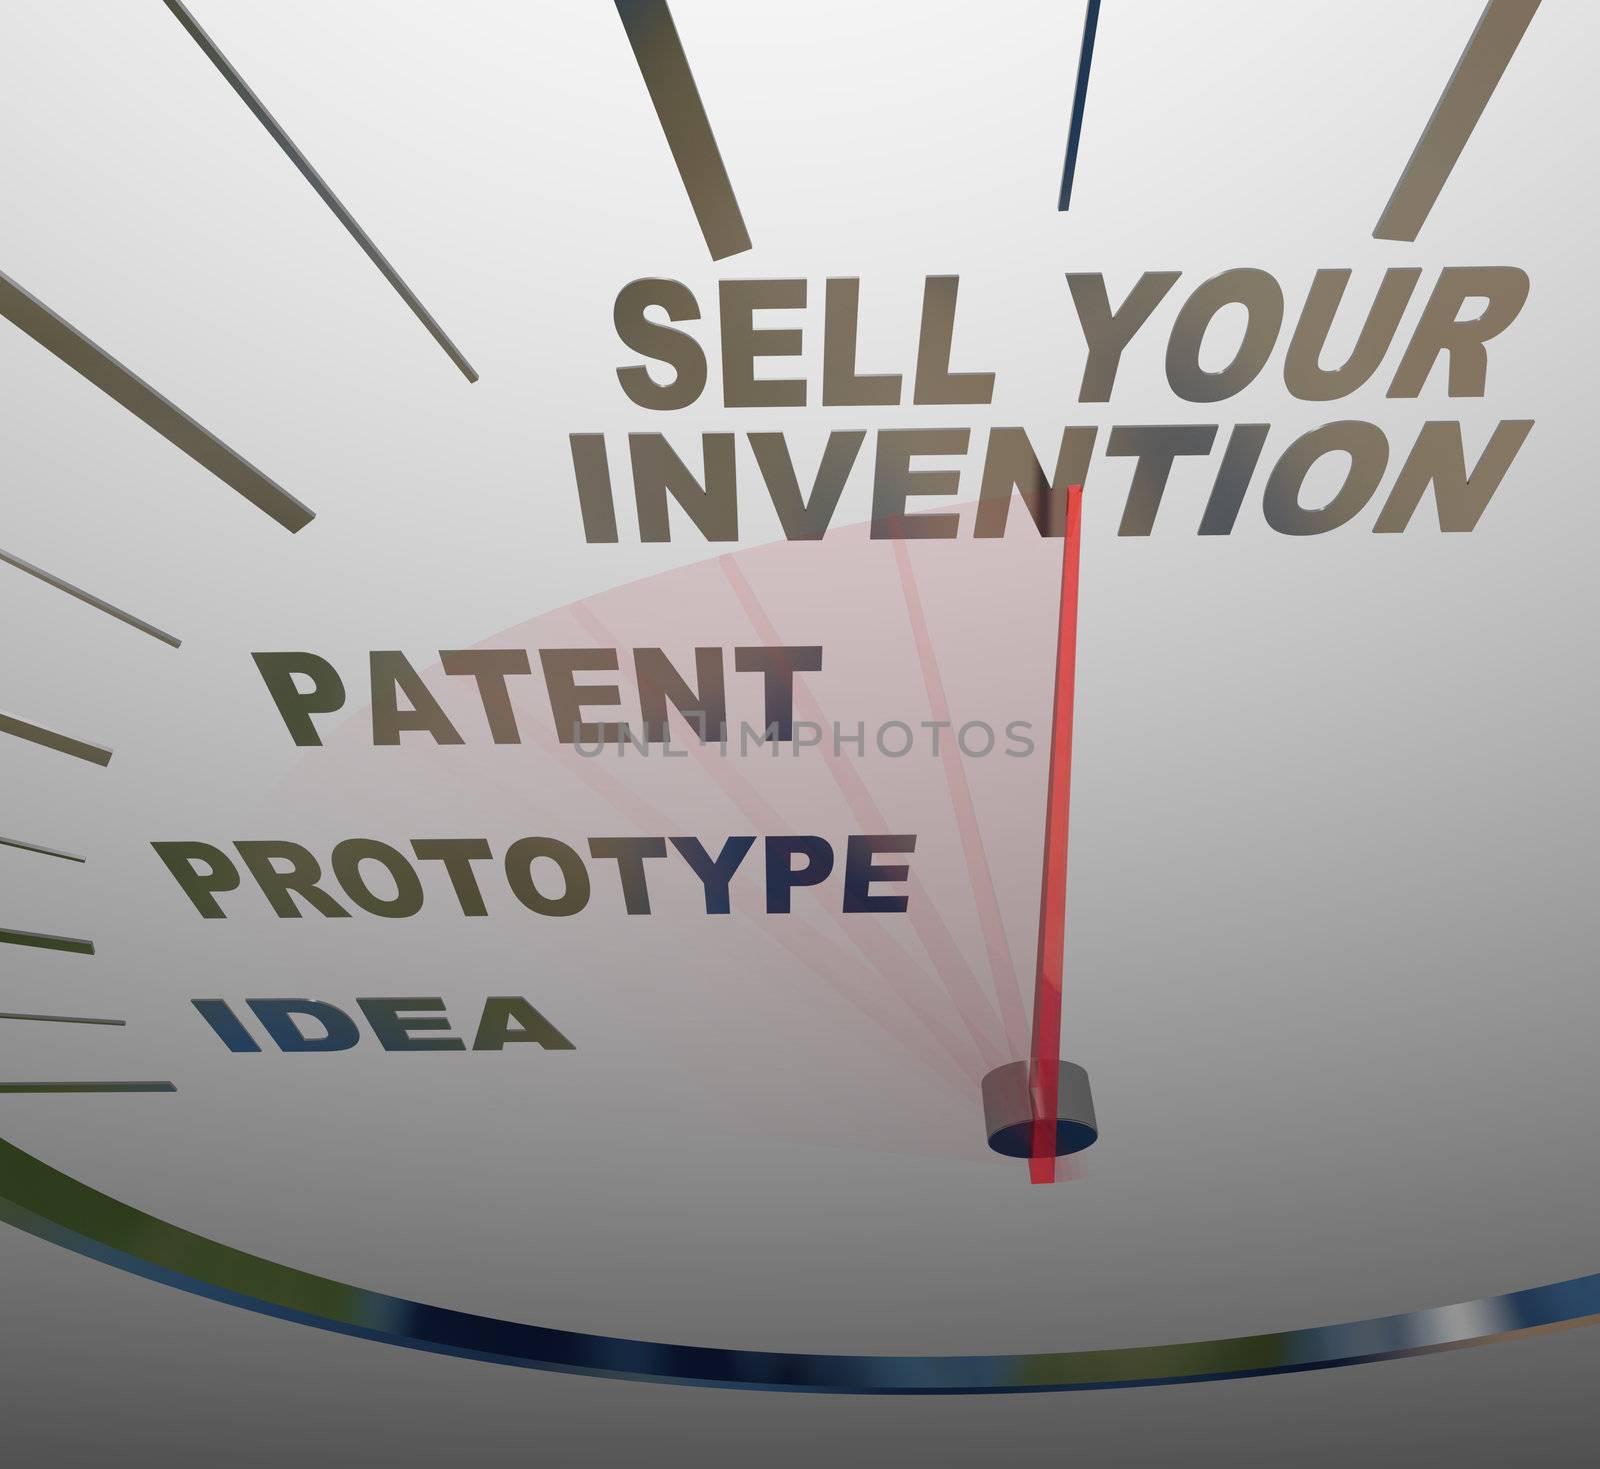 A speedometer with the words Sell Your Invention, Patent, Prototype, and Idea, representing the steps you should follow in creating a new device and selling it to customers